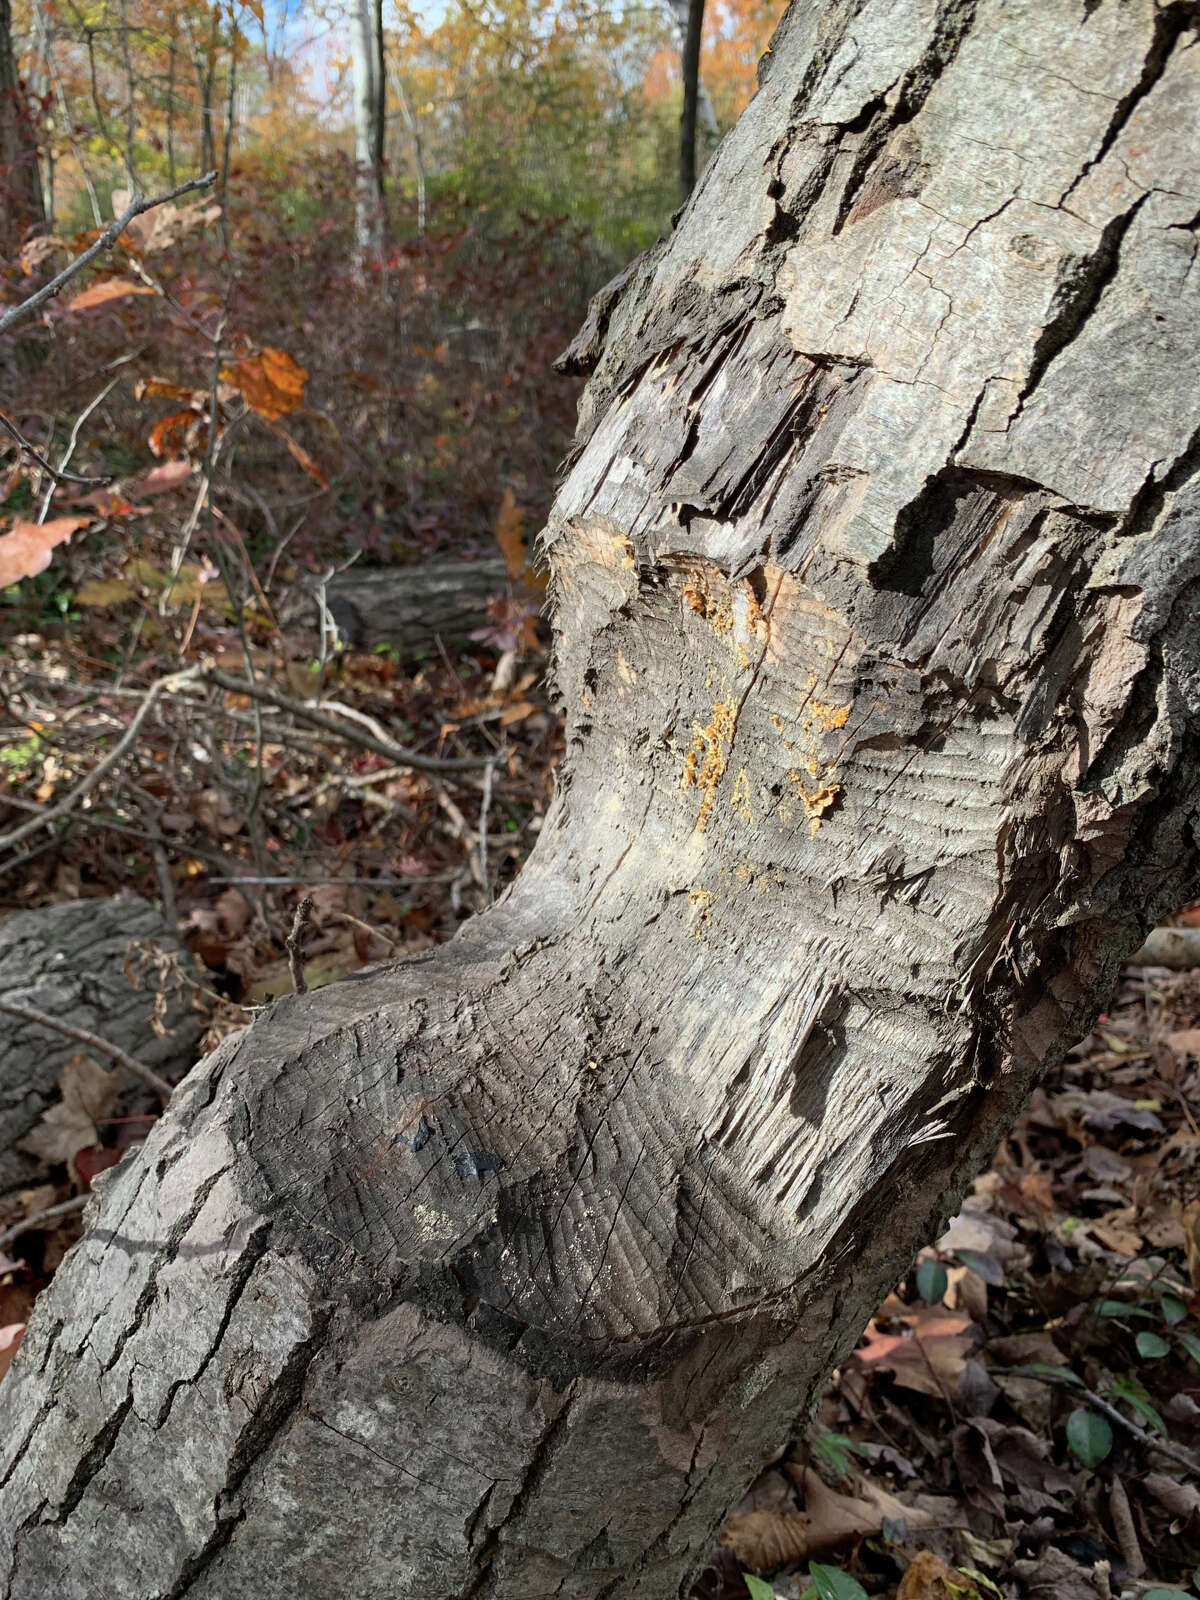 Bite marks on these trees near the Nature Center indicate the presence of beavers in the area. Spokesperson Kathy Kent said a beaver lodge and dam were spotted being built near on Nature Center property, with three beavers identified. 